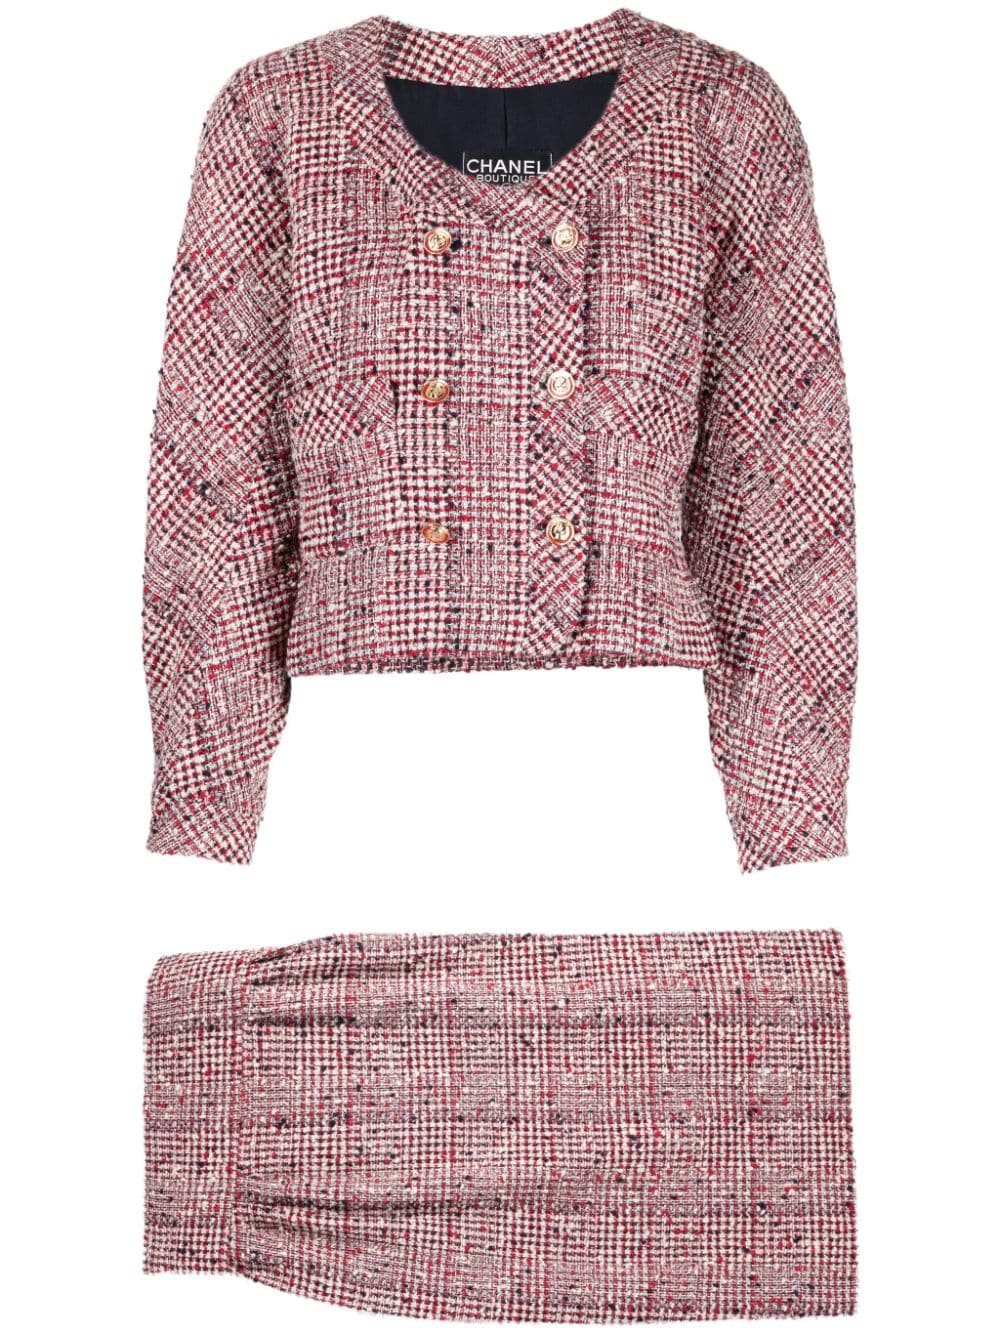 1993 double-breasted tweed skirt suit